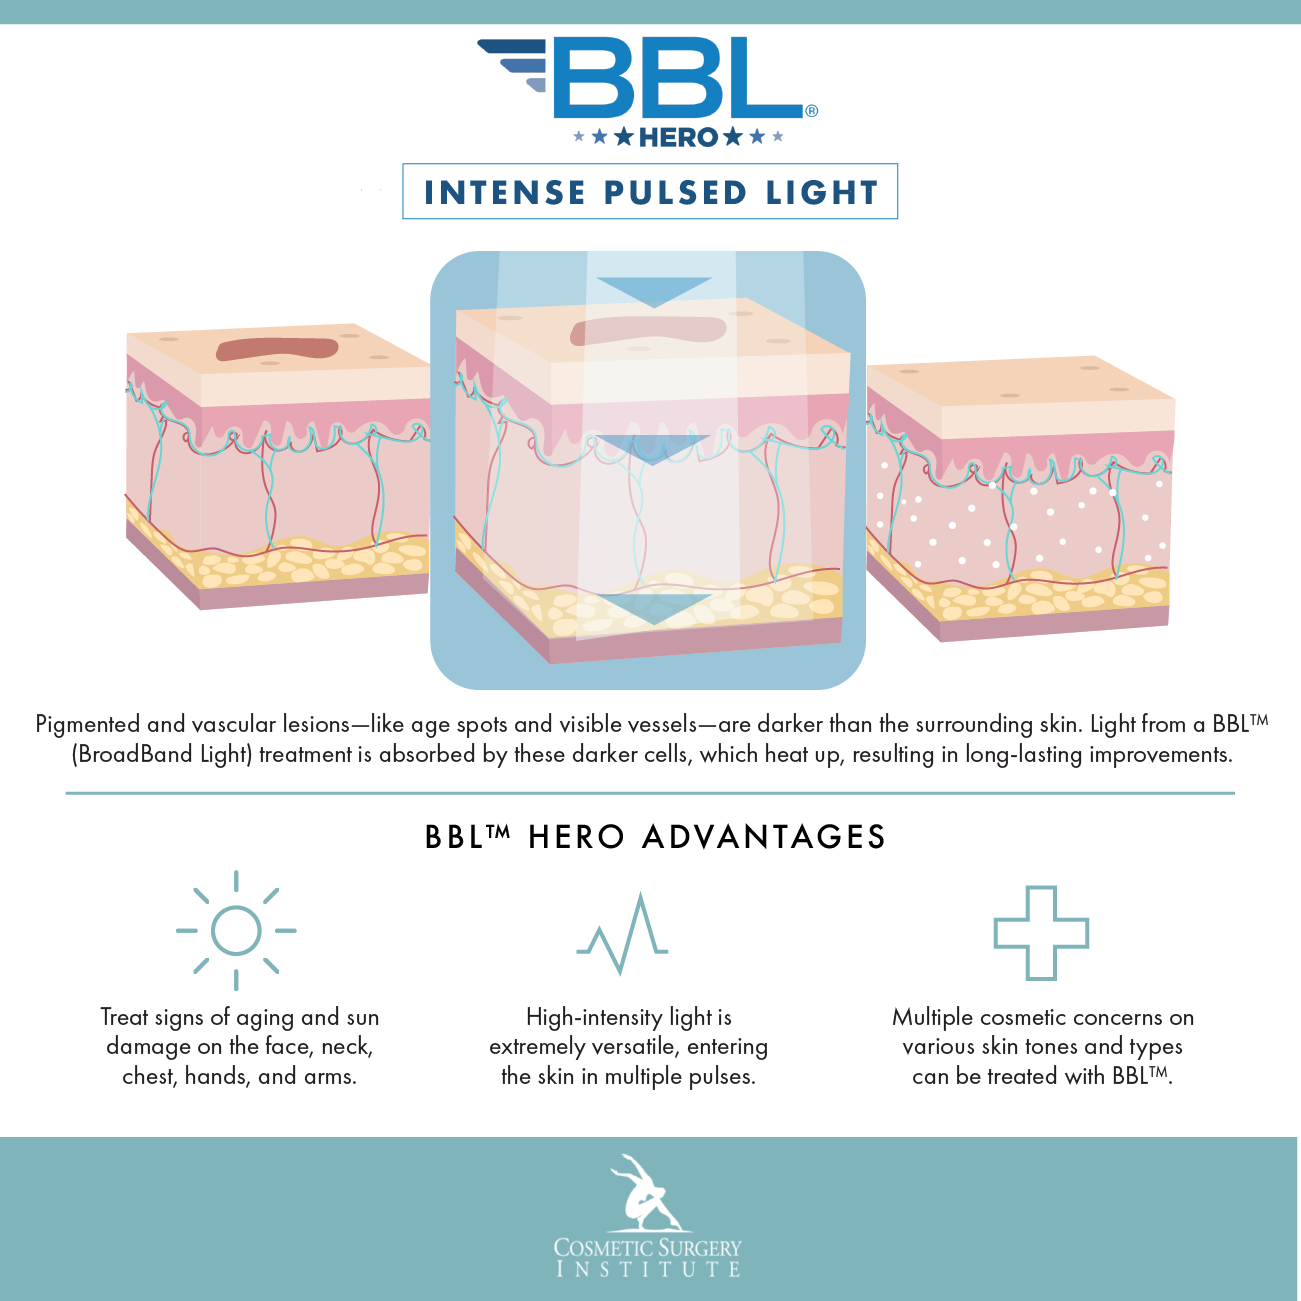 See how light powers BBL™ (BroadBand Light), a type of IPL at Palm Desert’s Cosmetic Surgery Institute.